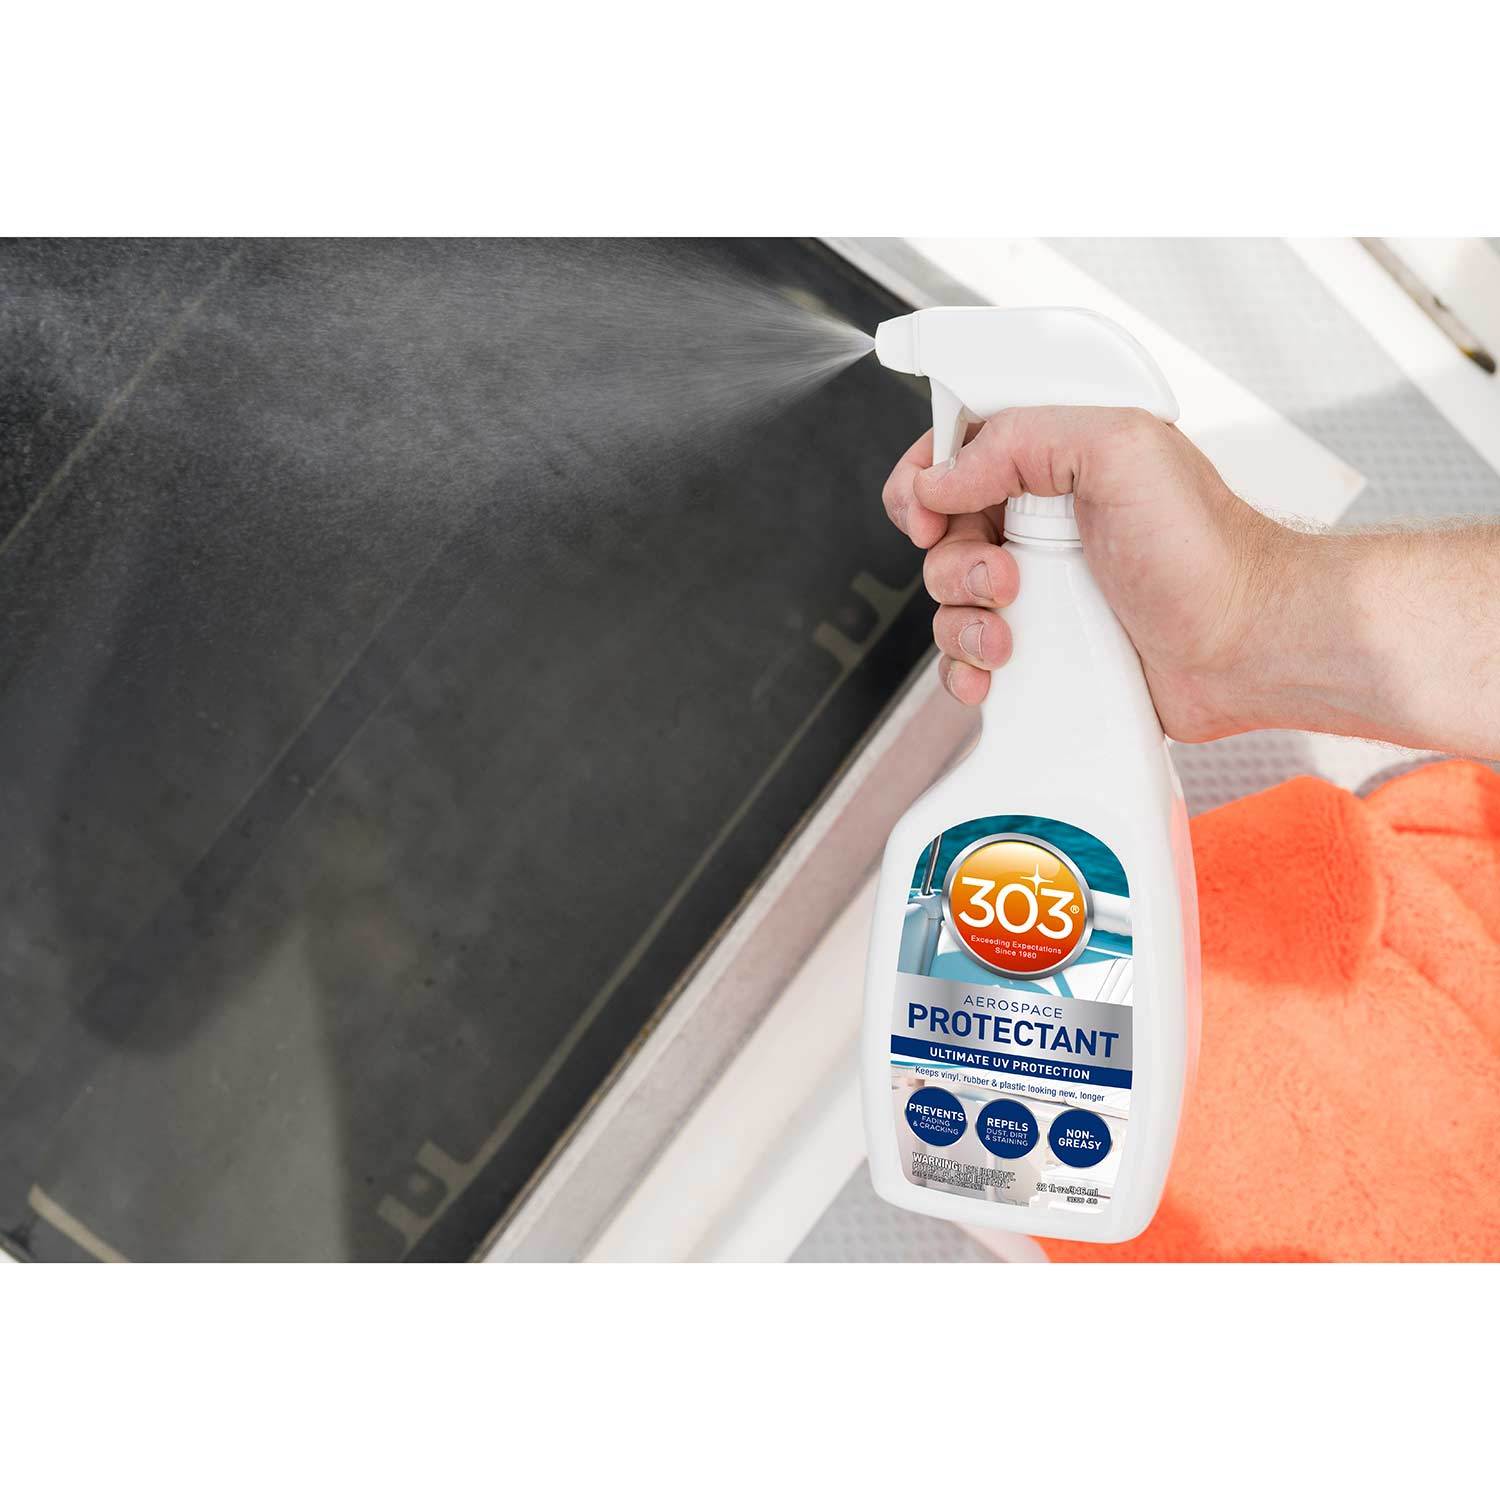 Boat Wax & Marine Vinyl Protectant 303 Products & 303 Protectants